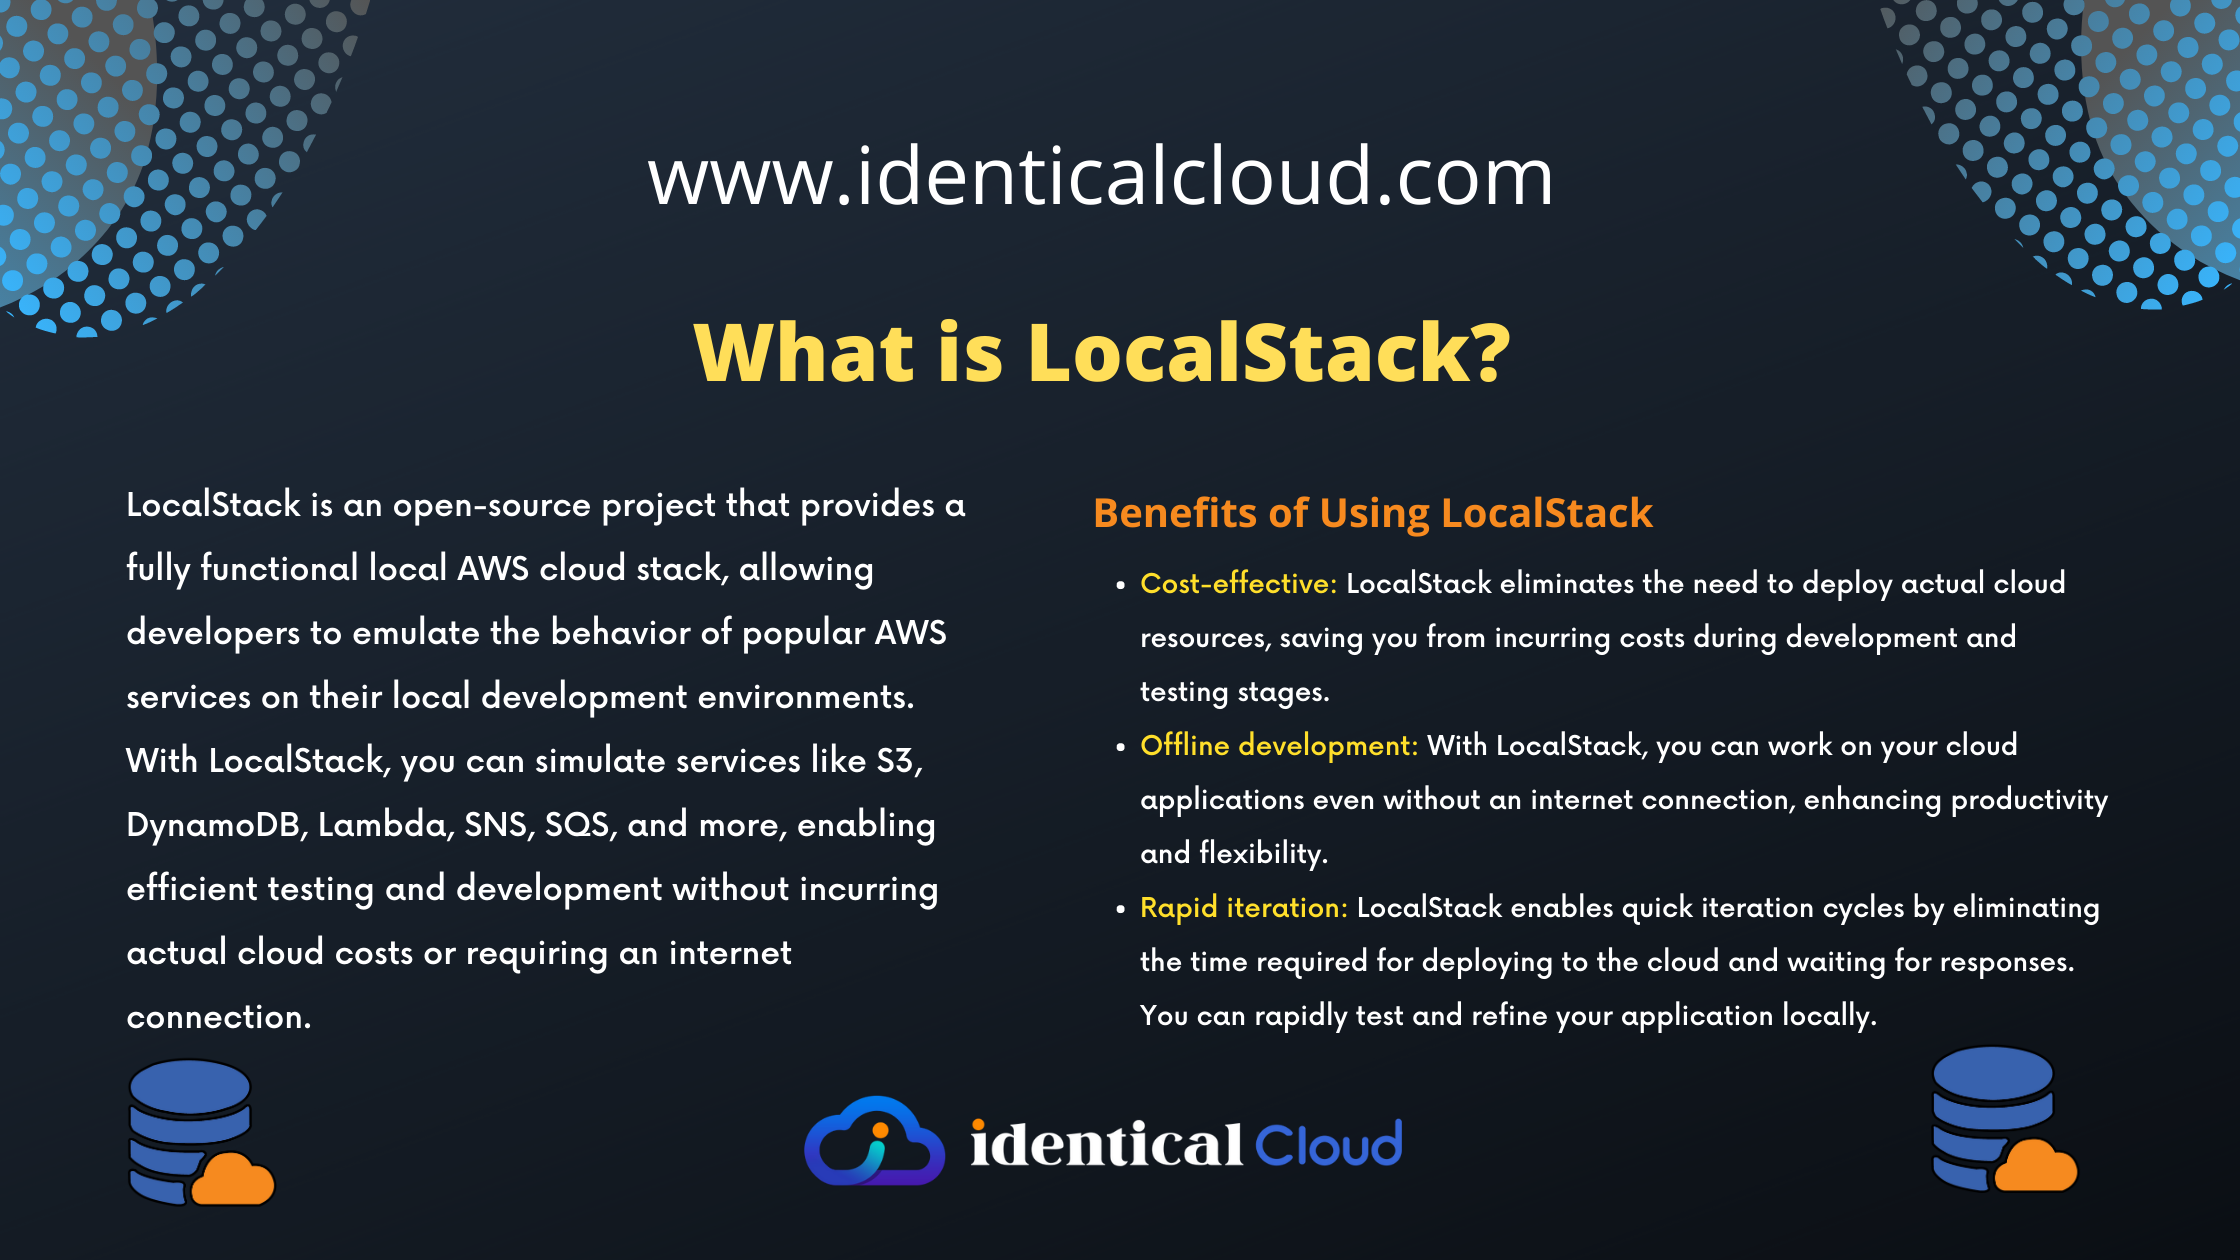 How to deploy and test cloud application without actually deploying it - localstack - identicalcloud.com